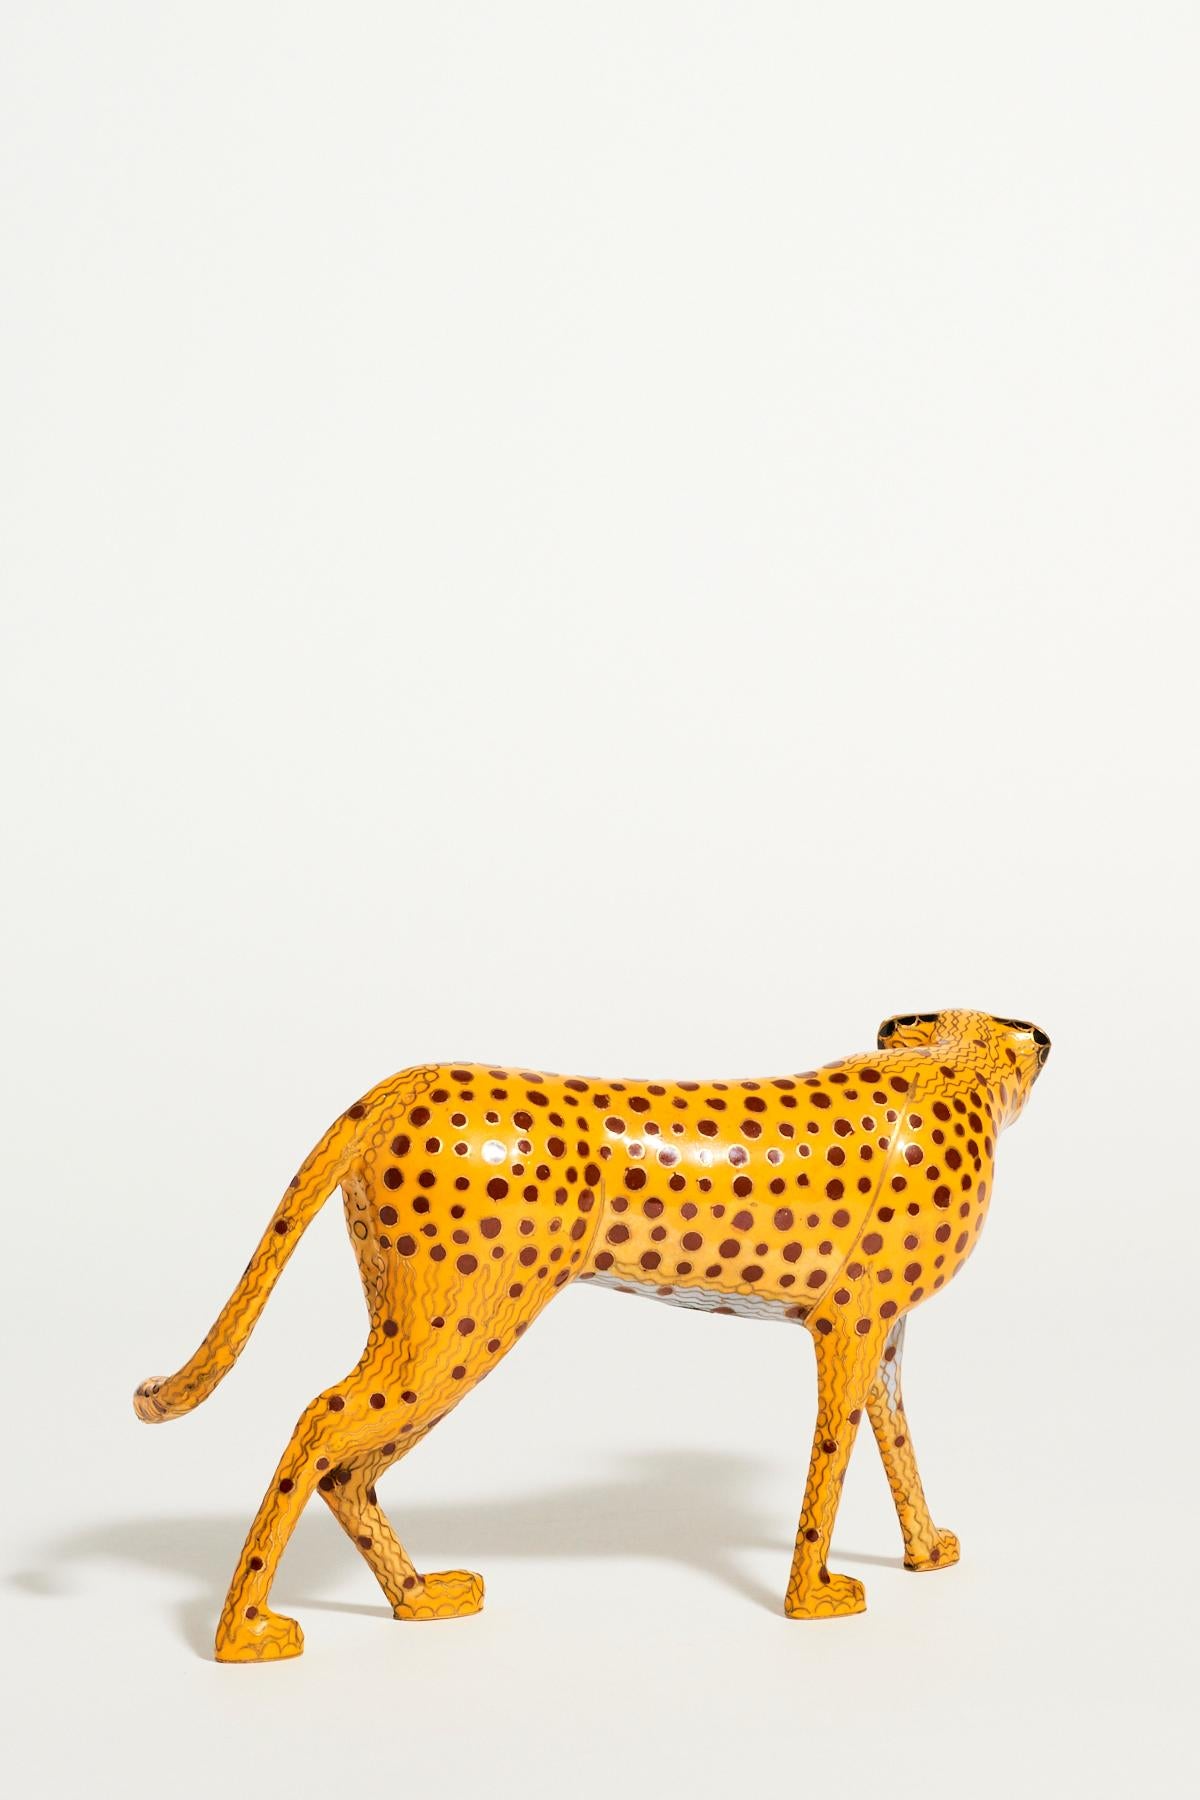 Cloisonné cheetah with amazing detail and charming expression.